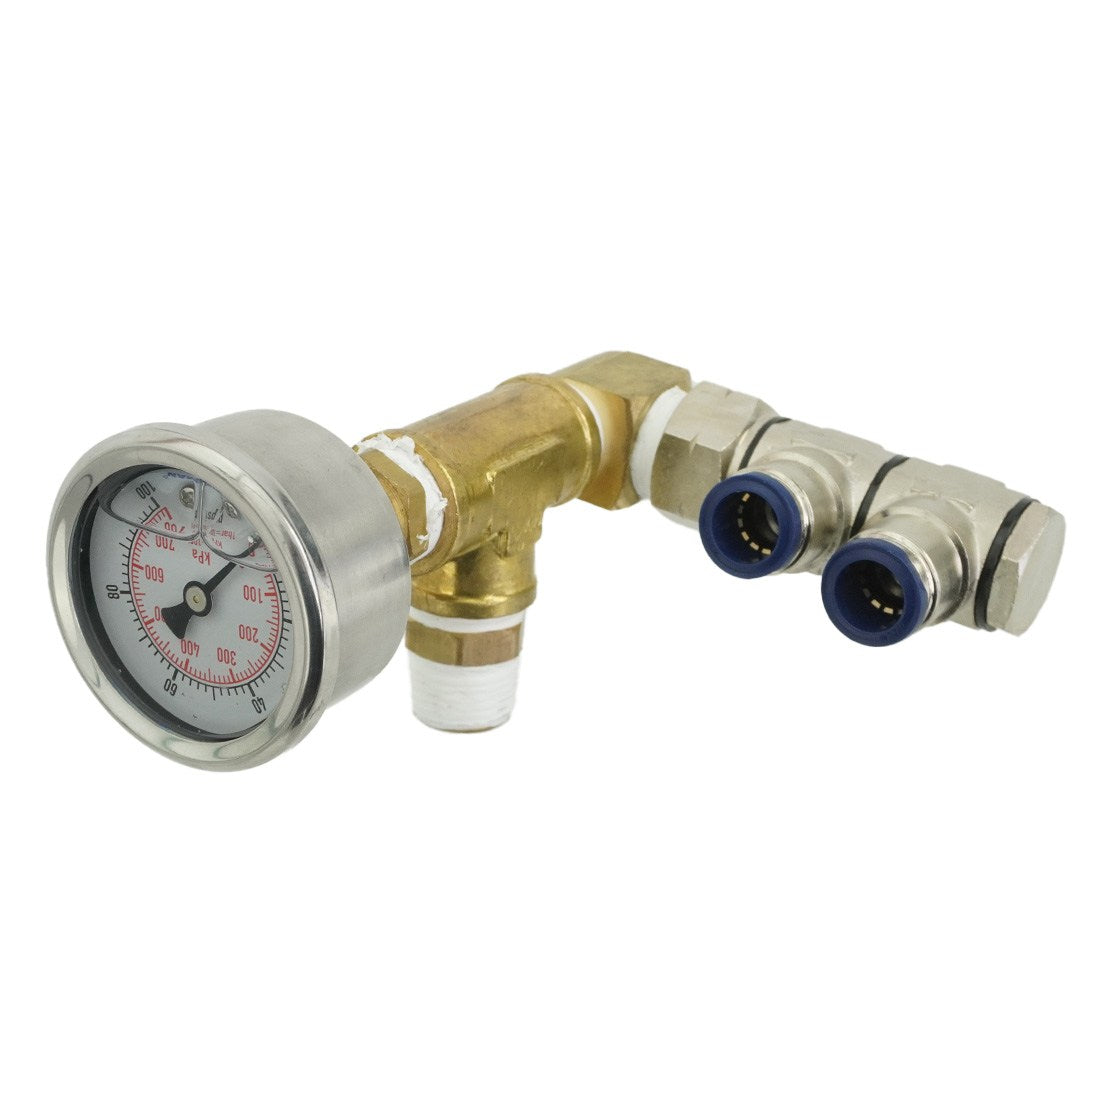 XERO Pure MAX Pressure Gauge Assembly Rignt Angle View